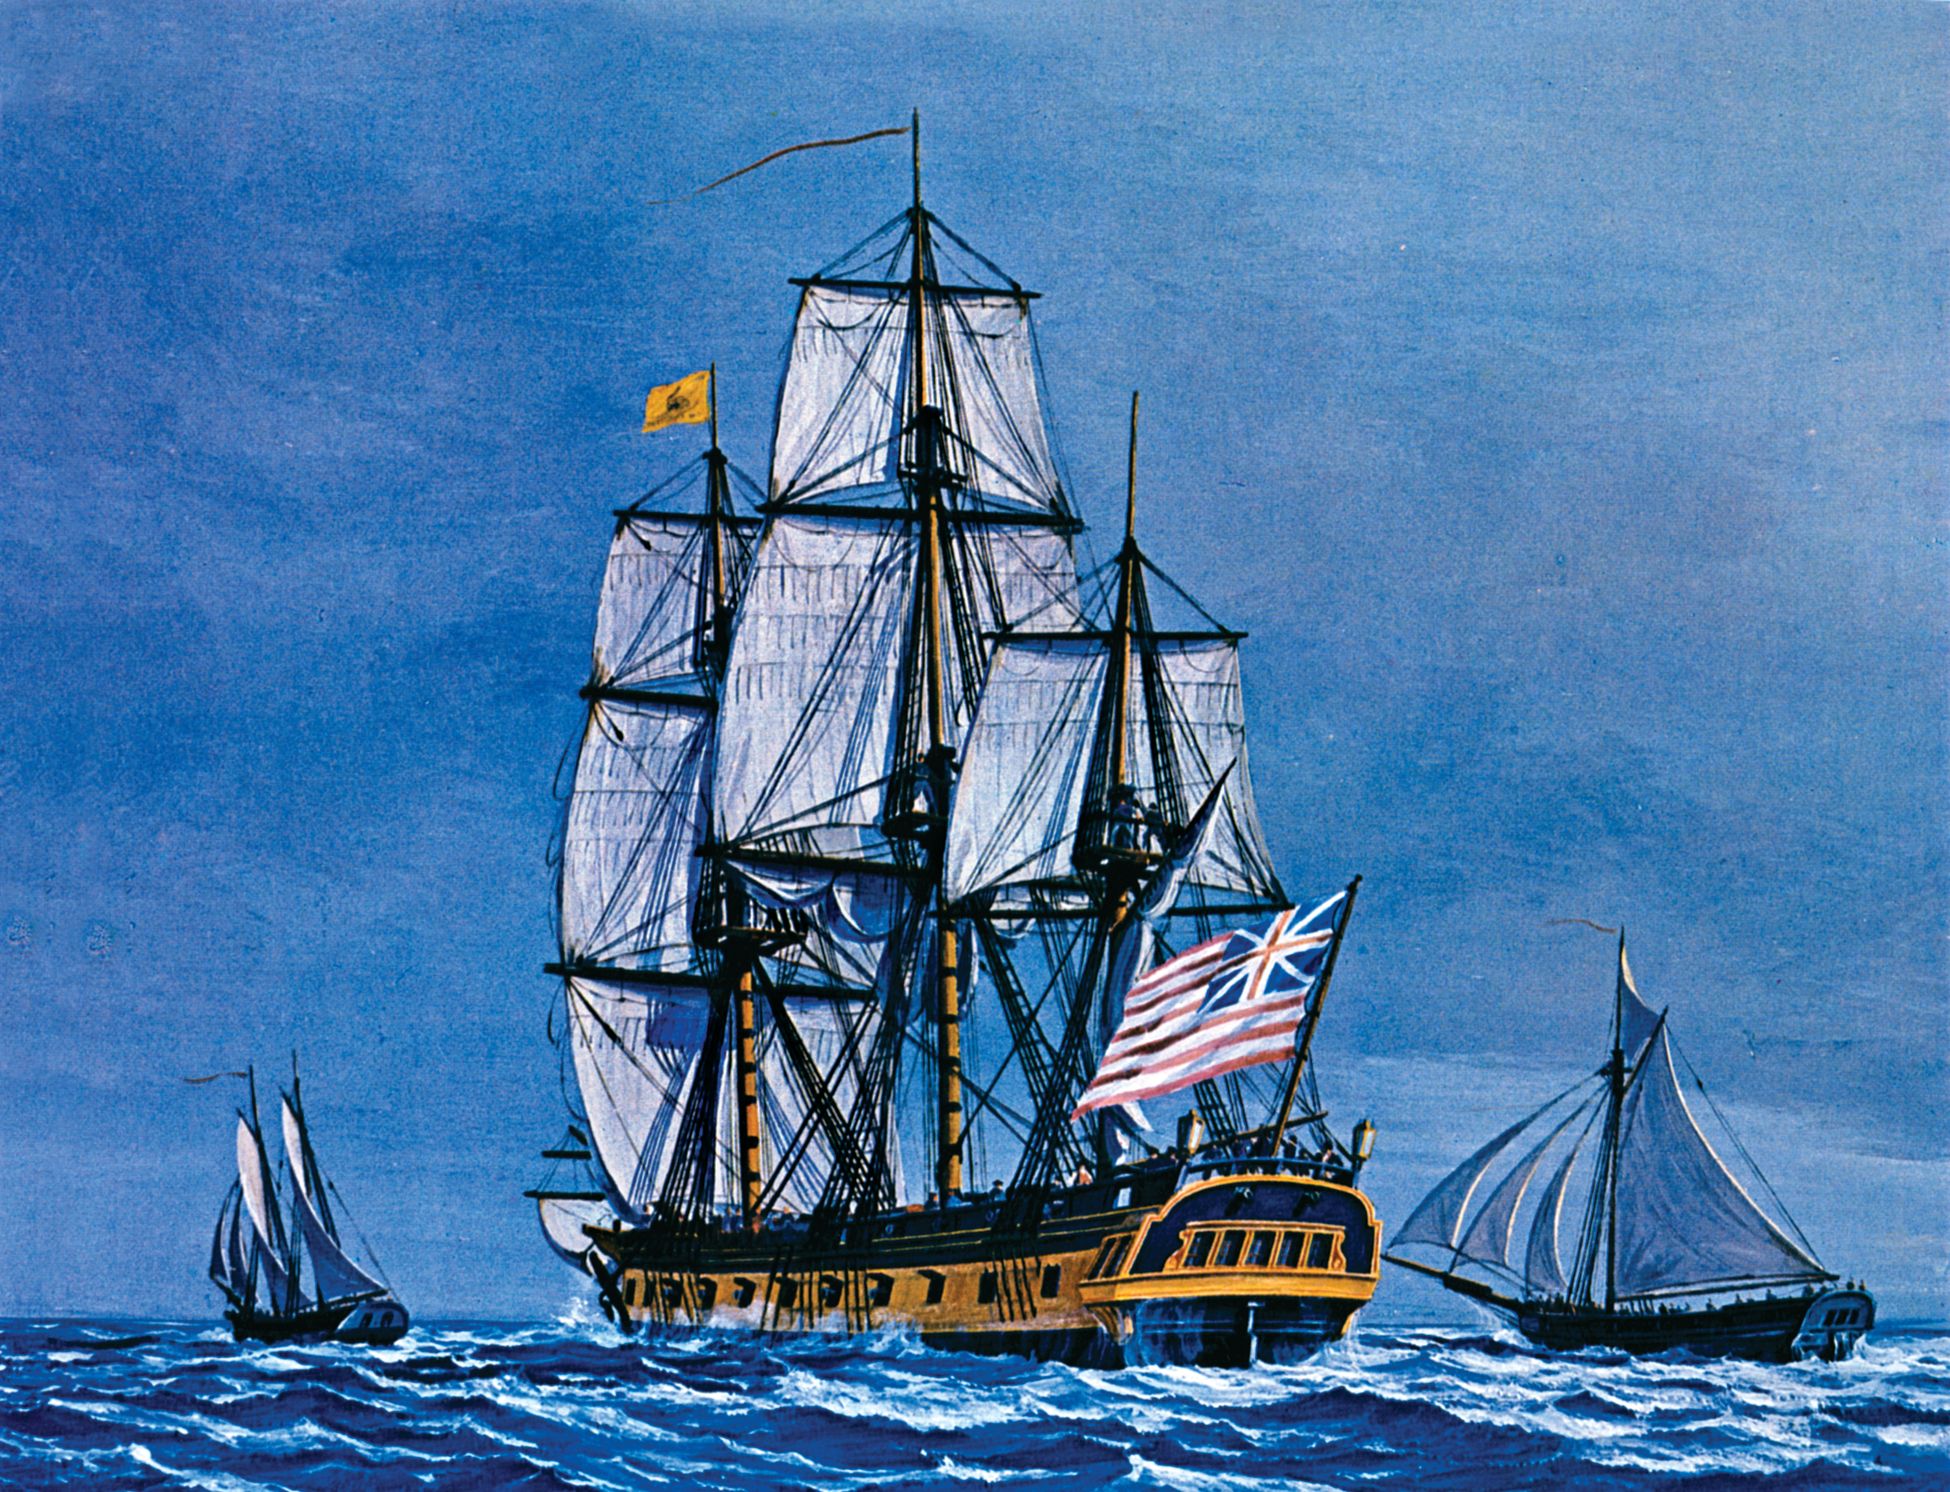 Formerly the Black Prince captained by John Barry, the Alfred raises the flag of the Continental Navy for the first time. Painting by Nowland van Powell.